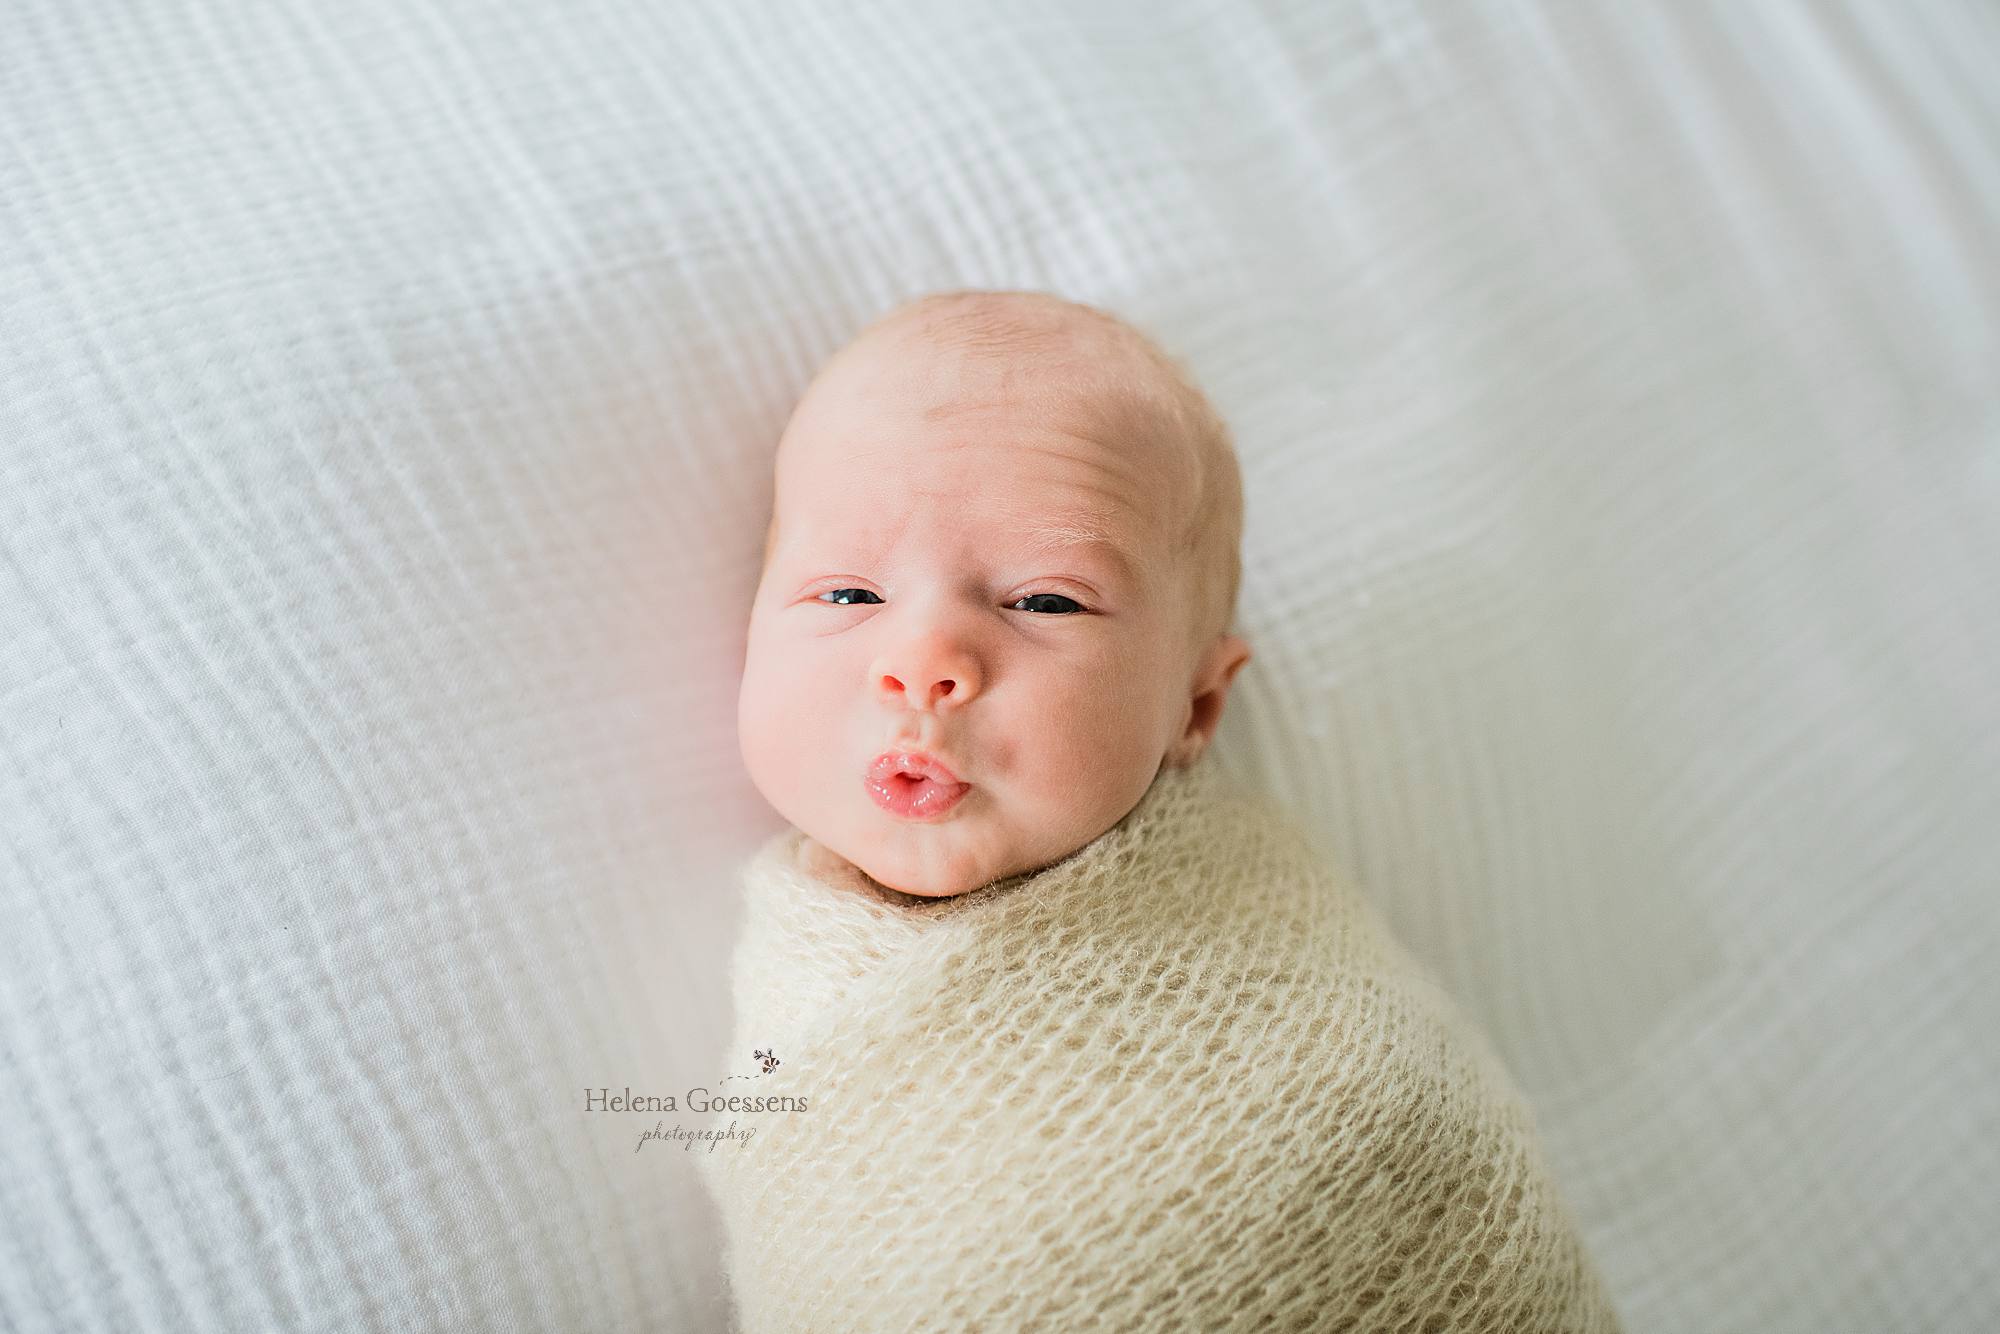 Helena Goessens Photography photographs newborn baby boy making faces during lifestyle session at home